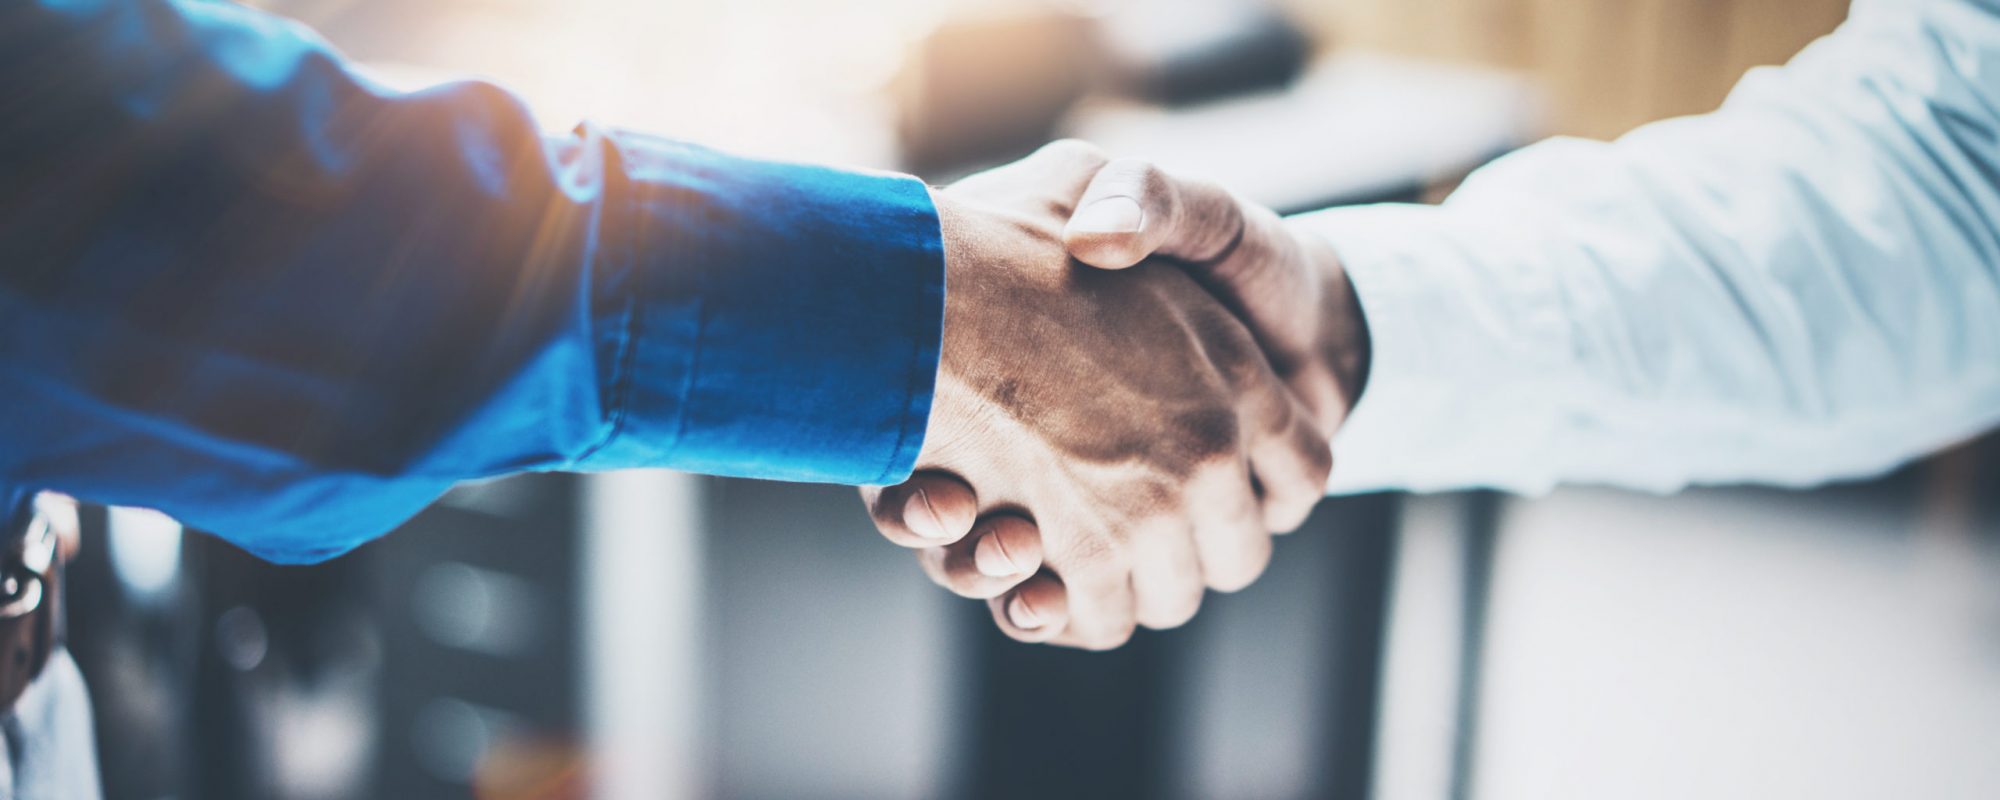 Close up view of business partnership handshake concept.Photo of two businessman handshaking process.Successful deal after great meeting.Horizontal, blurred background